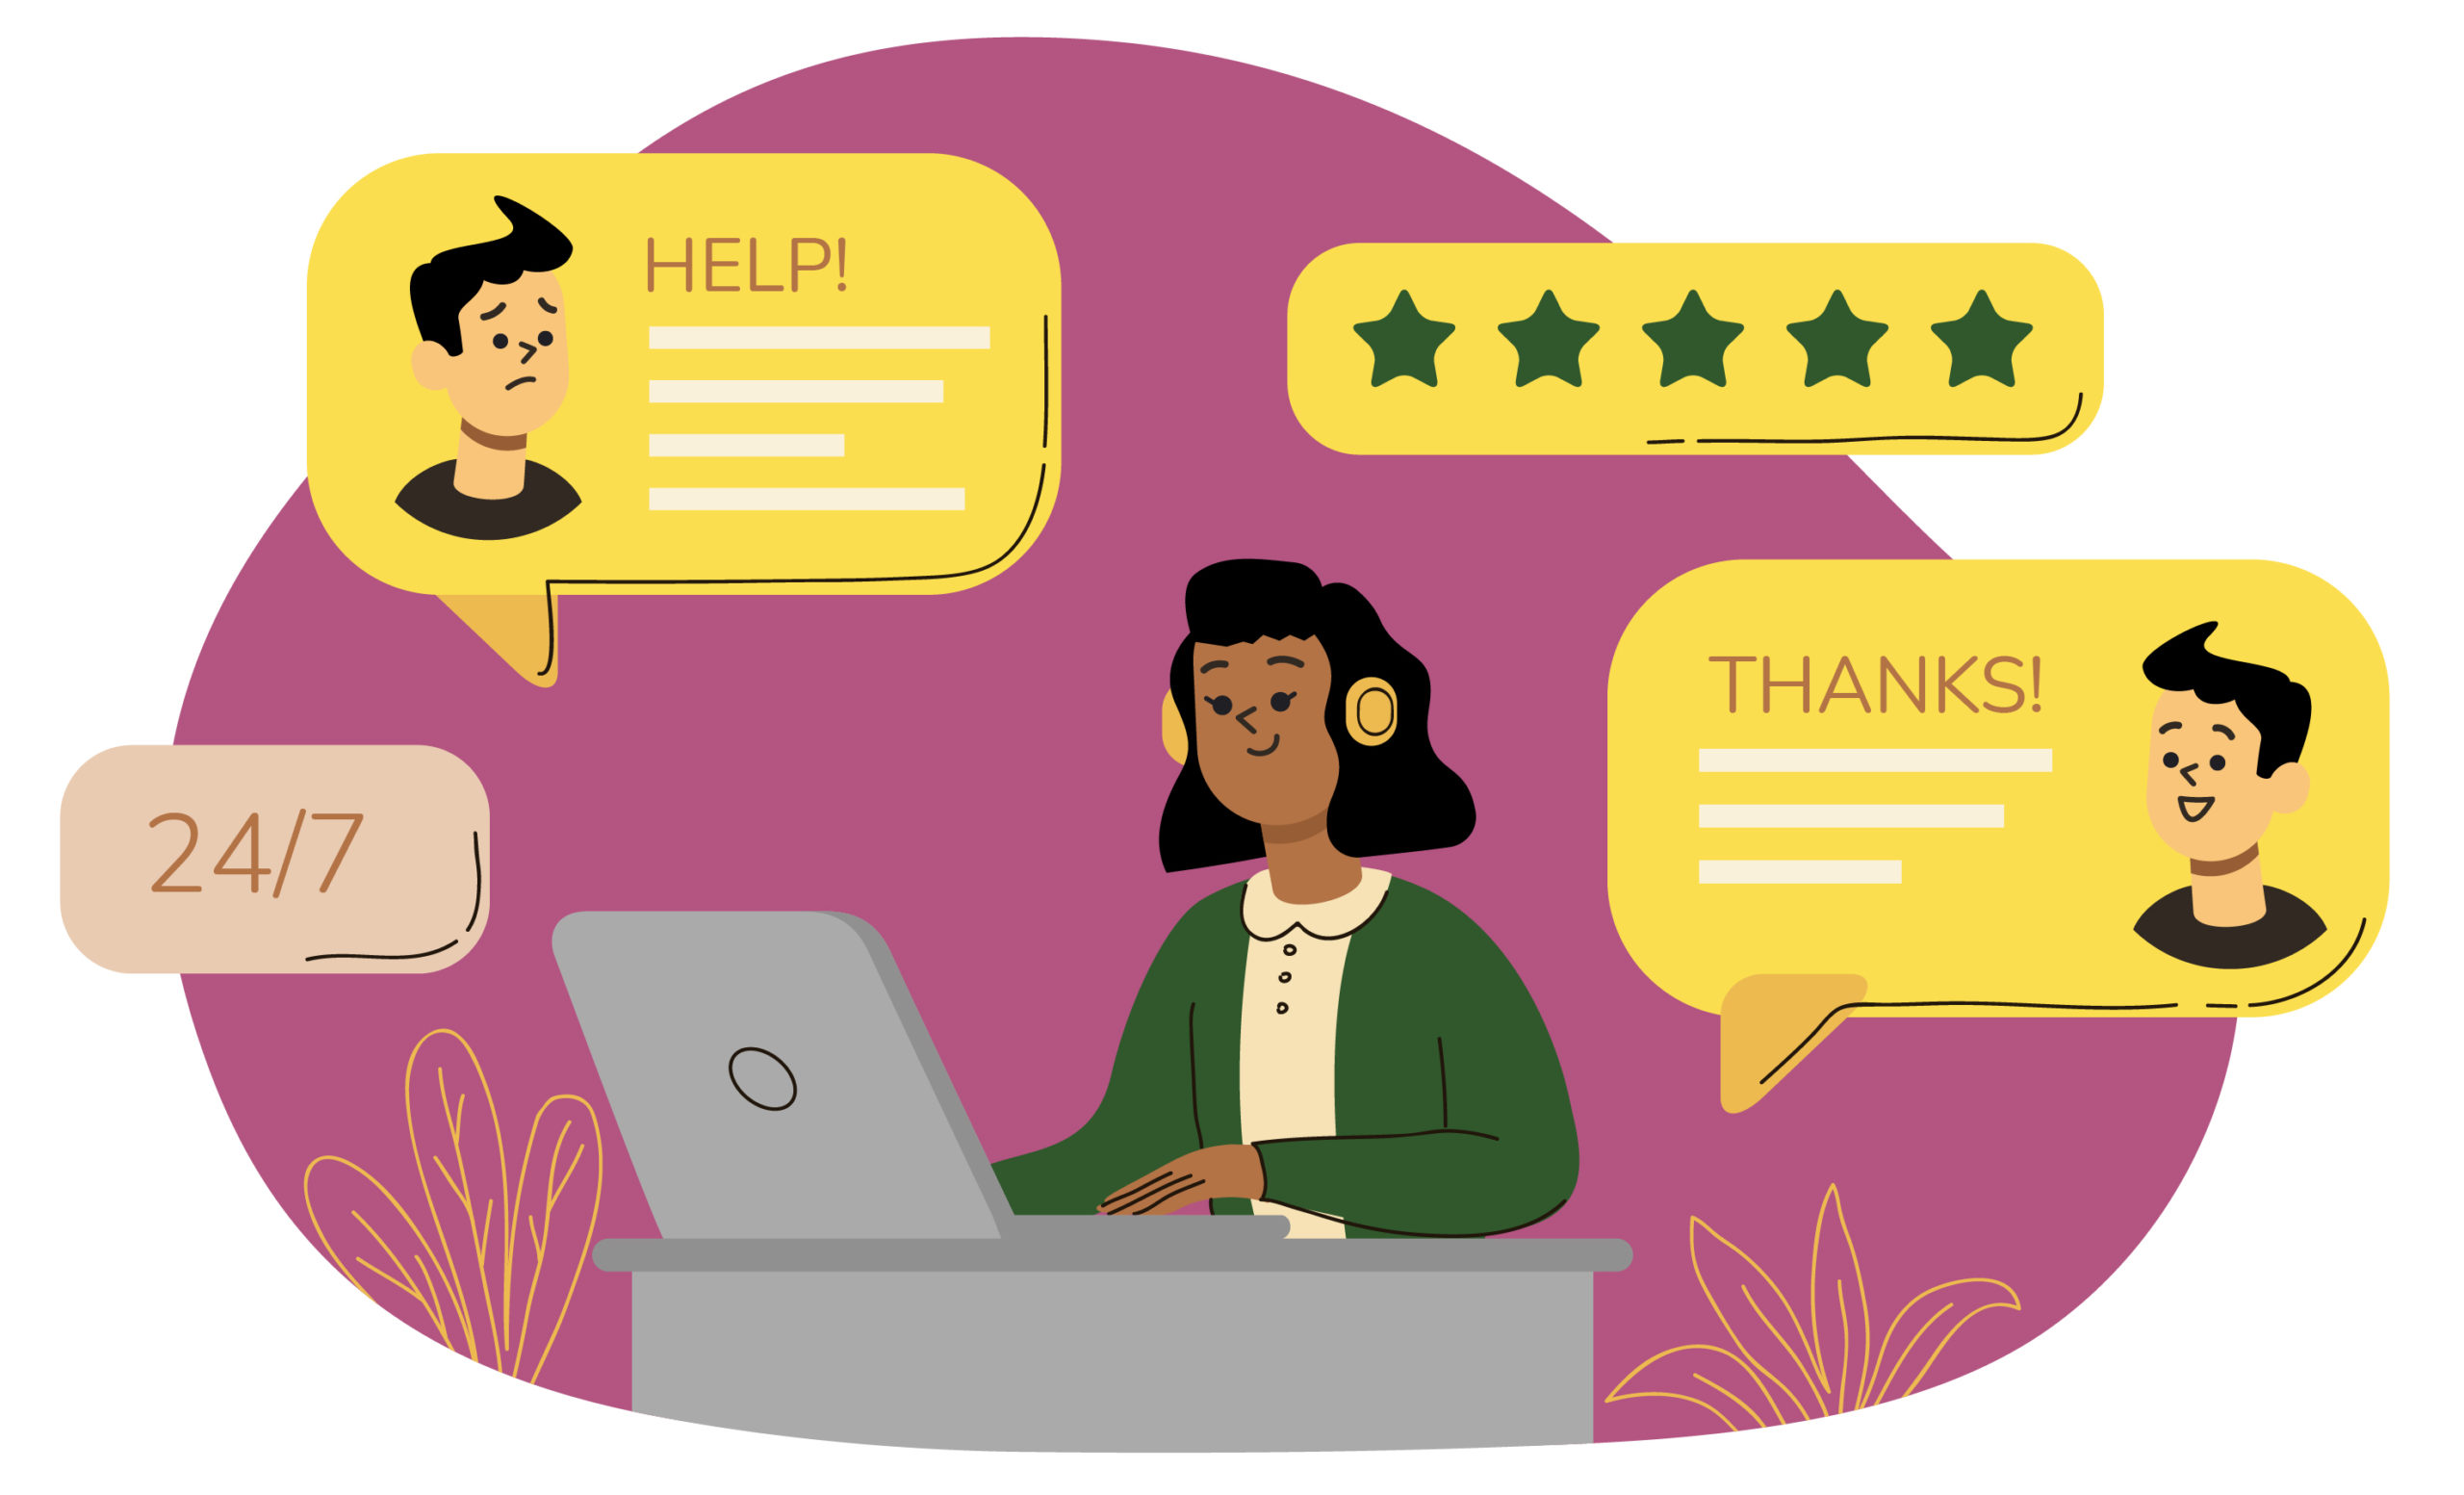 An illustration of a customer service chatbot, designed to assist customers with their inquiries from cold calling and provide support\